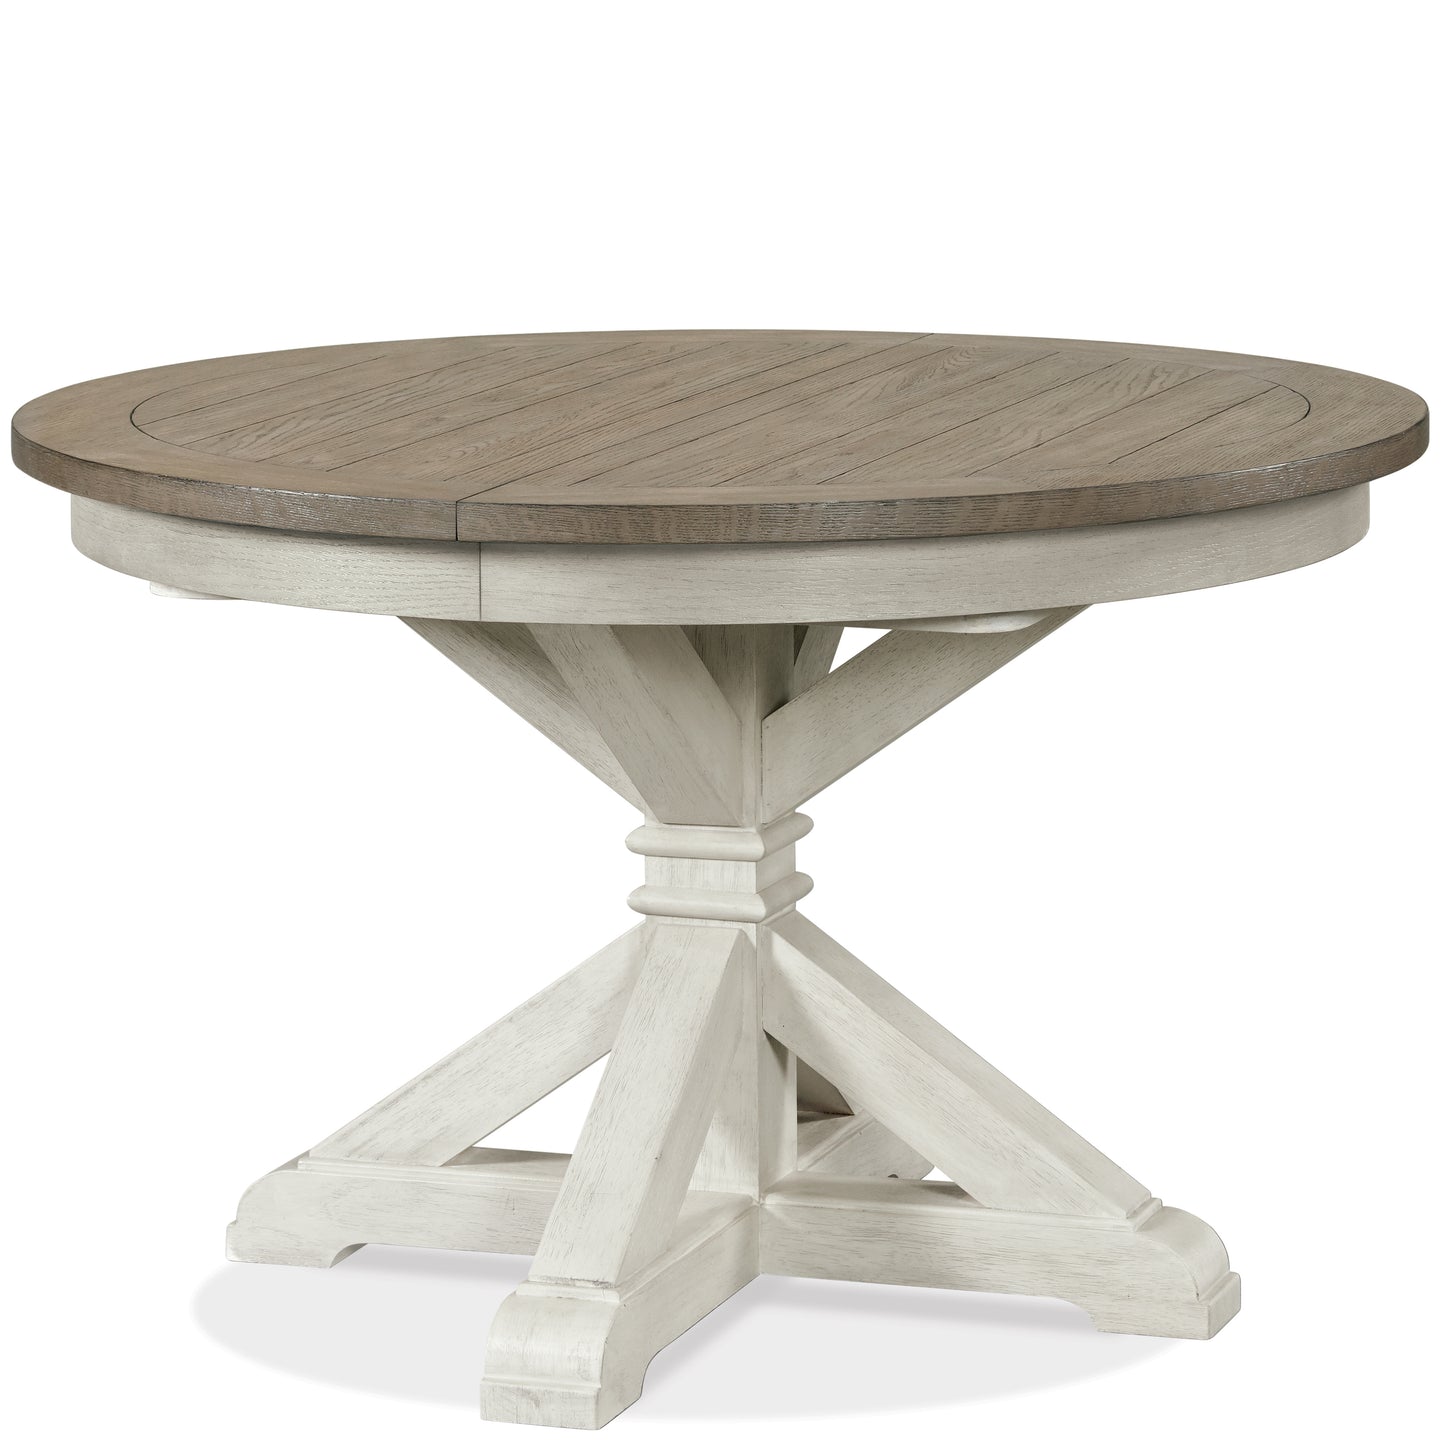 Roundhill Furniture Harola Round Pedestal Dining Table with 18" Leaf, Distressed Pine Finish